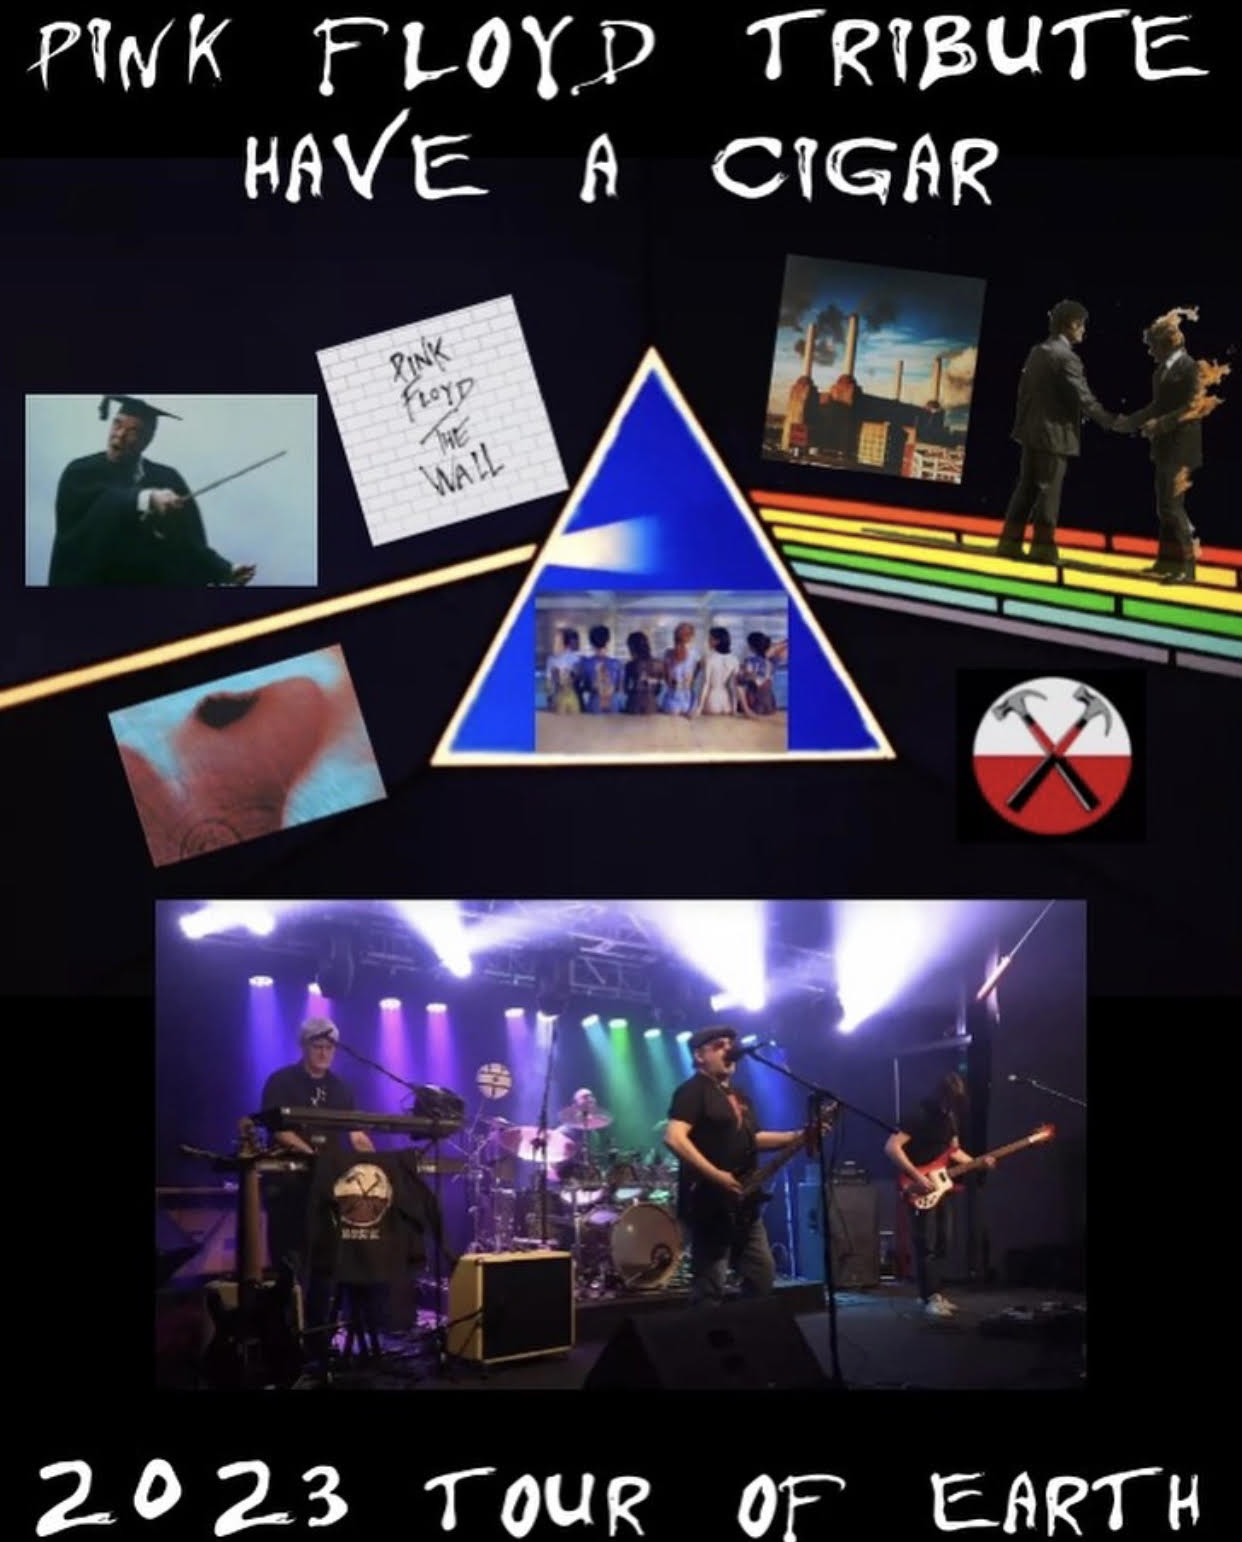 Have A Cigar - A Tribute to Pink Floyd 